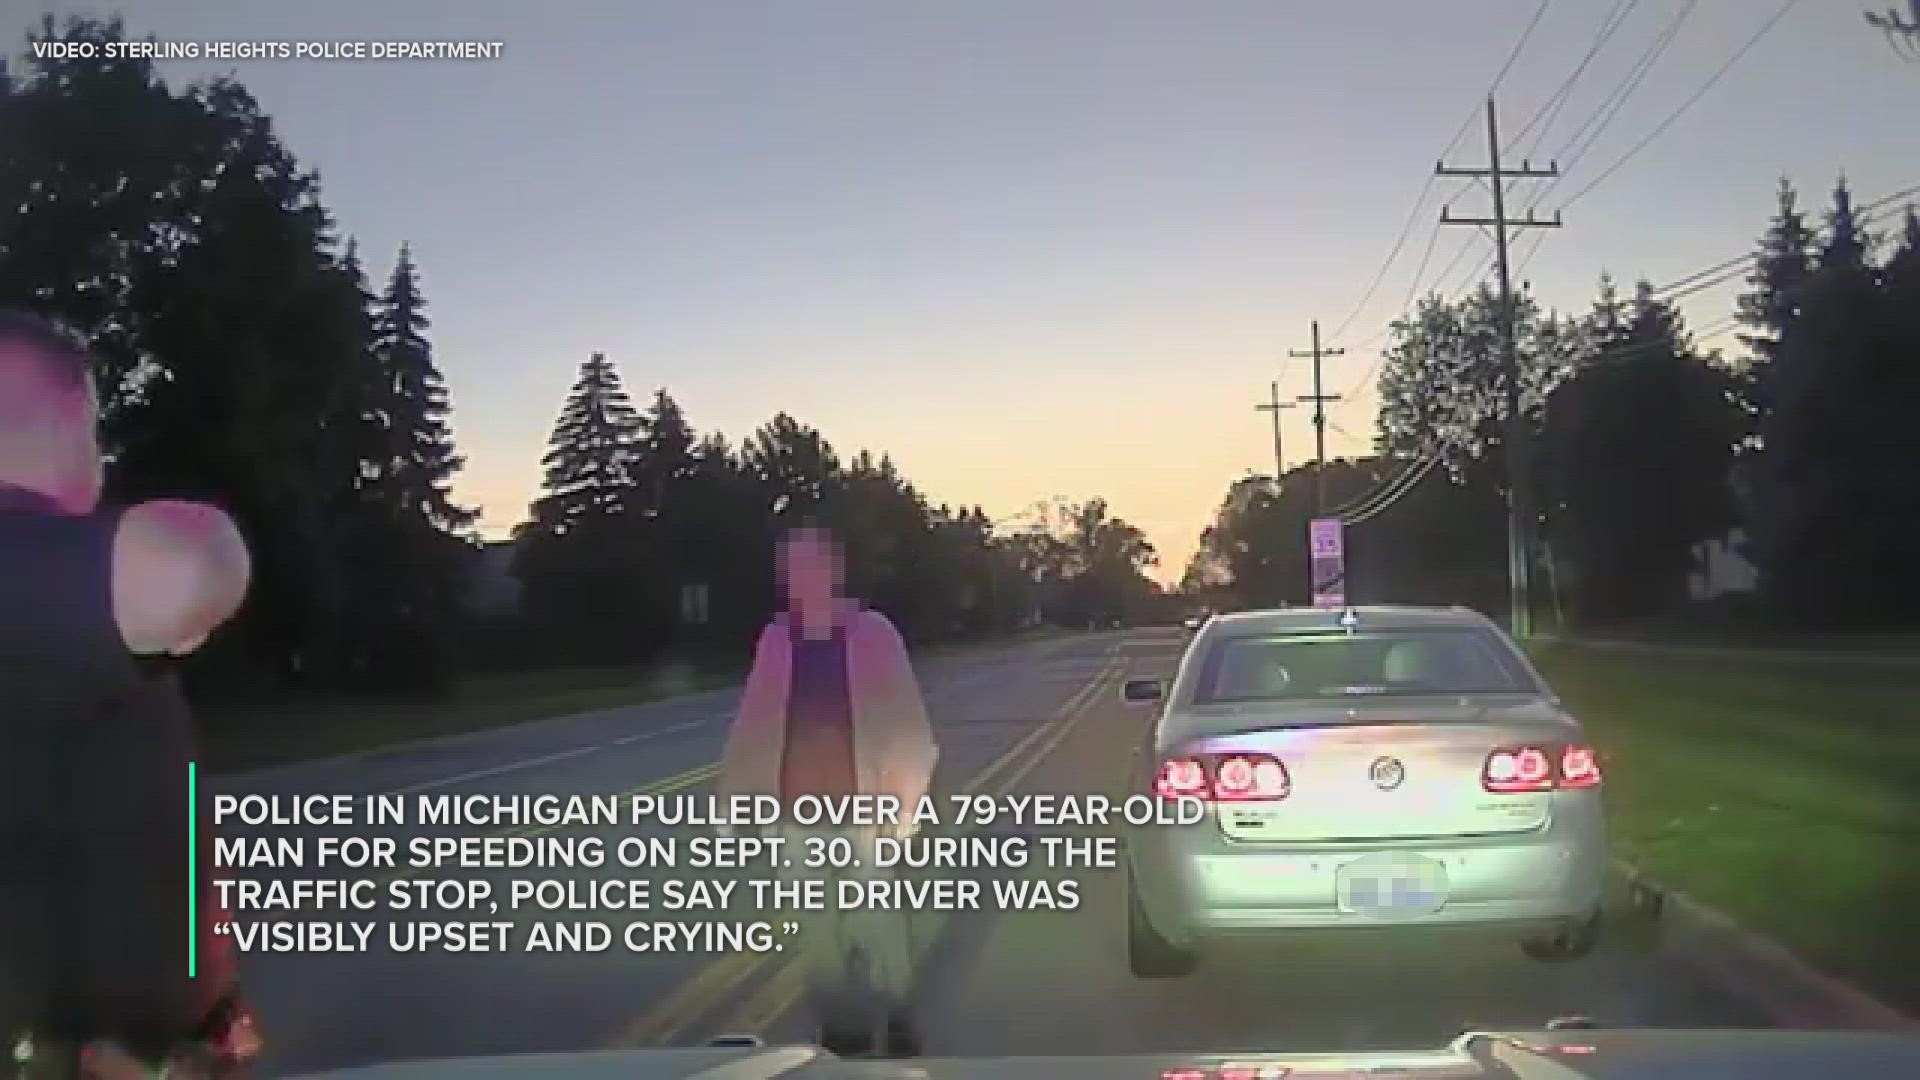 A Michigan police officer pulled a driver over for speeding, but it ended with a heartwarming favor for the man in need.